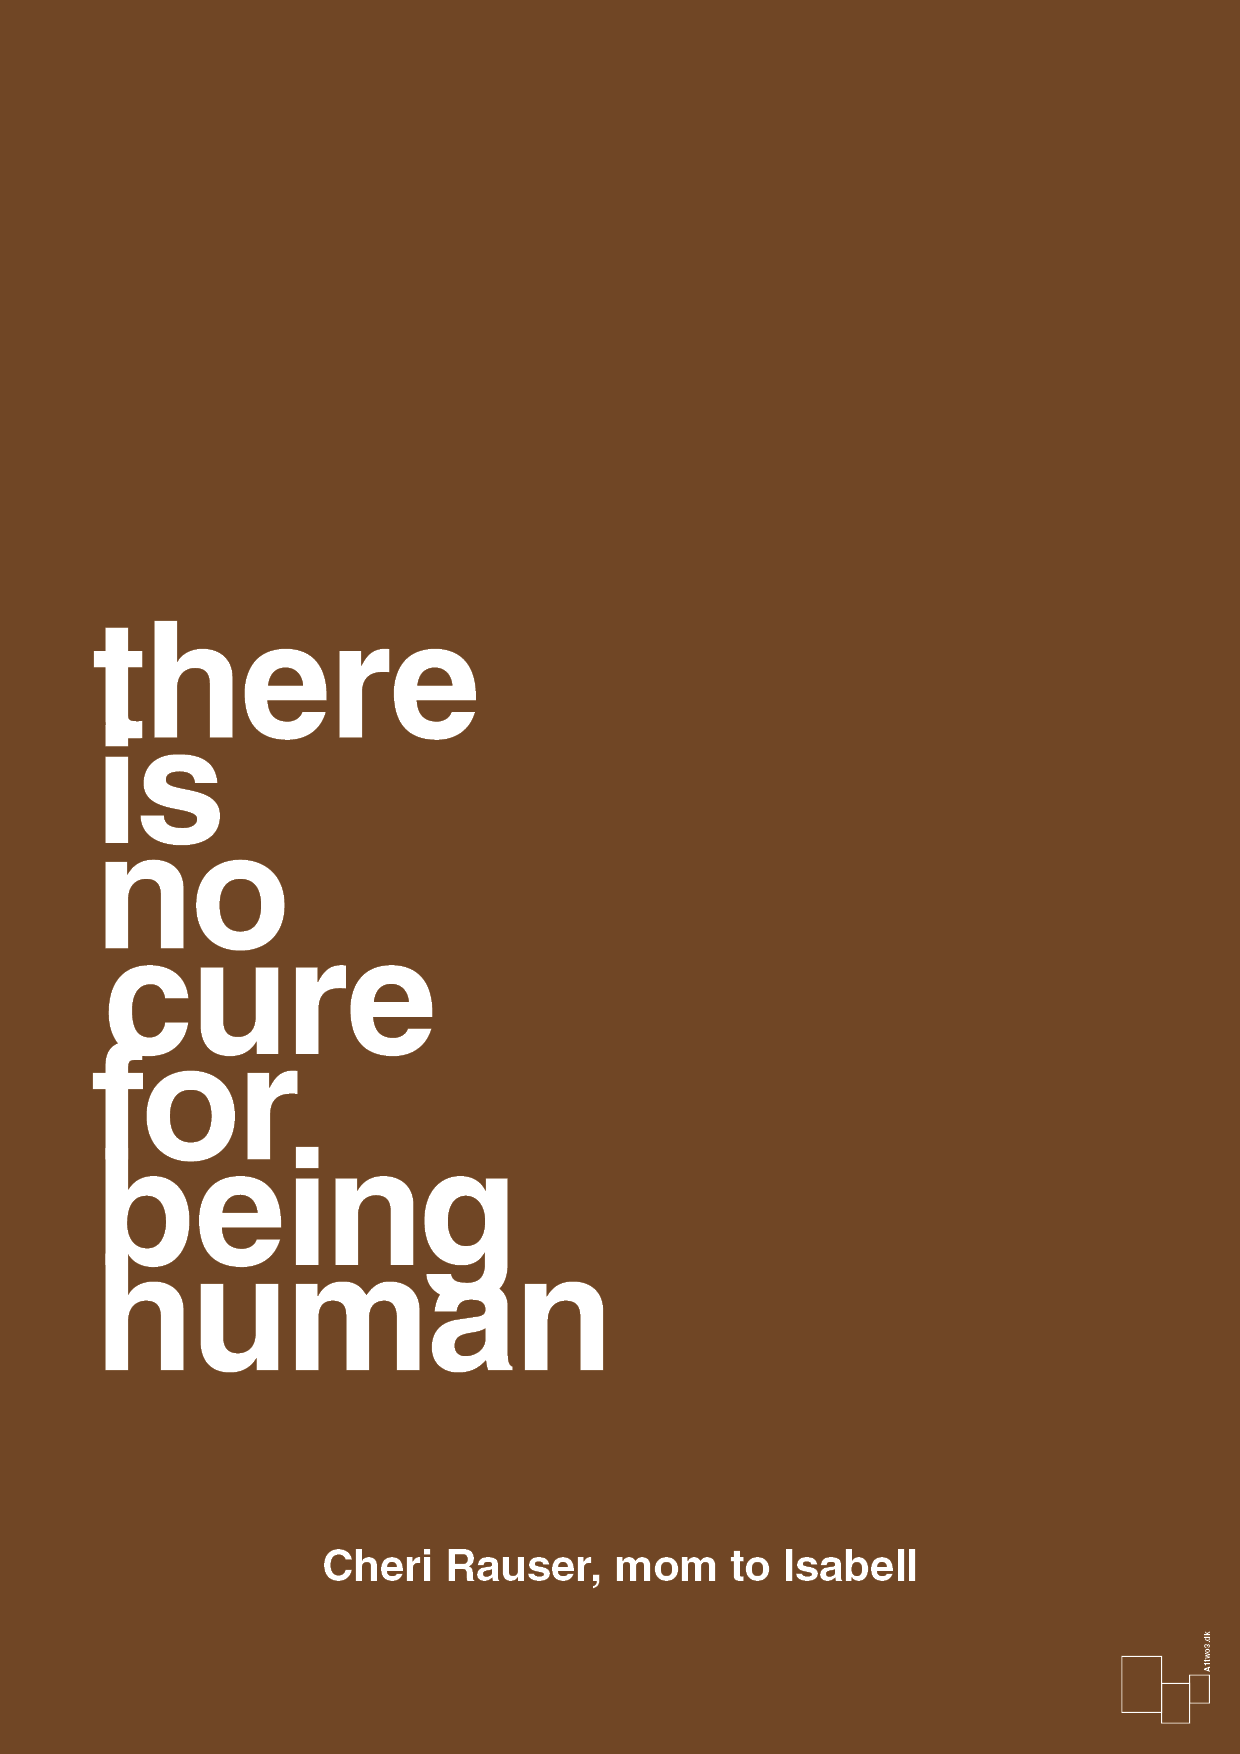 there is no cure for being human - Plakat med Samfund i Dark Brown